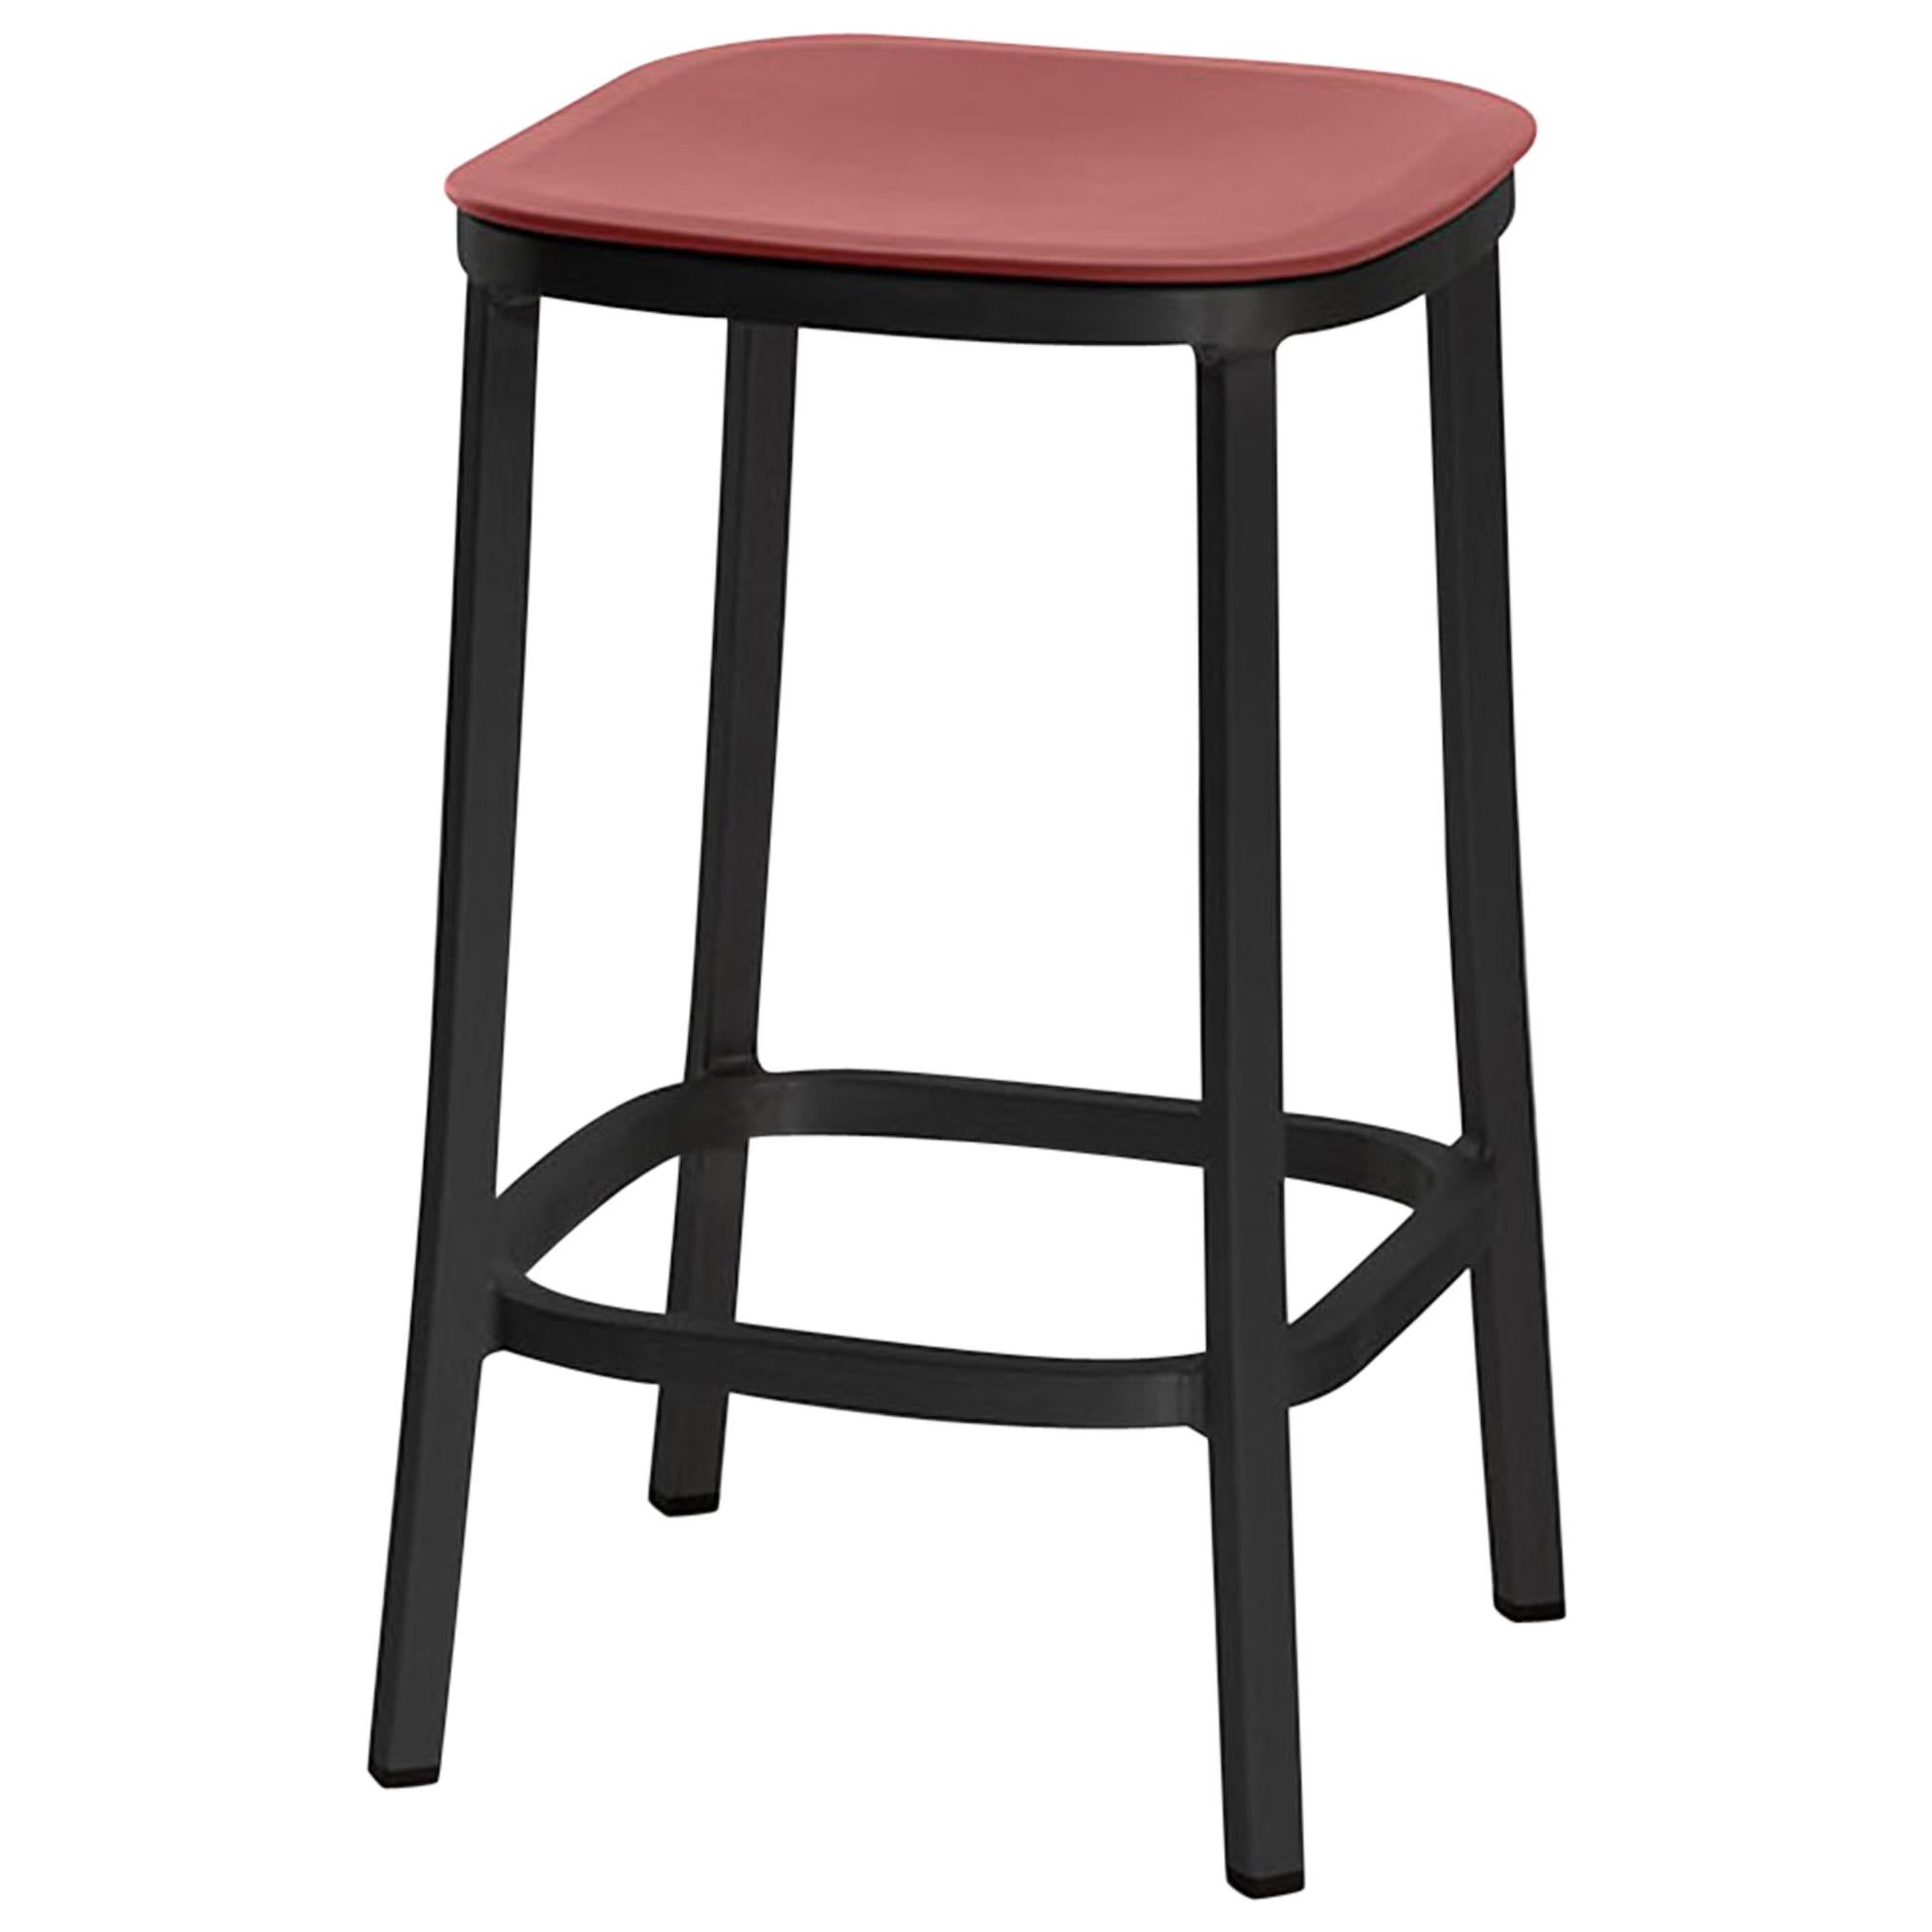 Emeco 1 Inch Counter Stool in Dark Aluminum and Red Ochre by Jasper Morrison